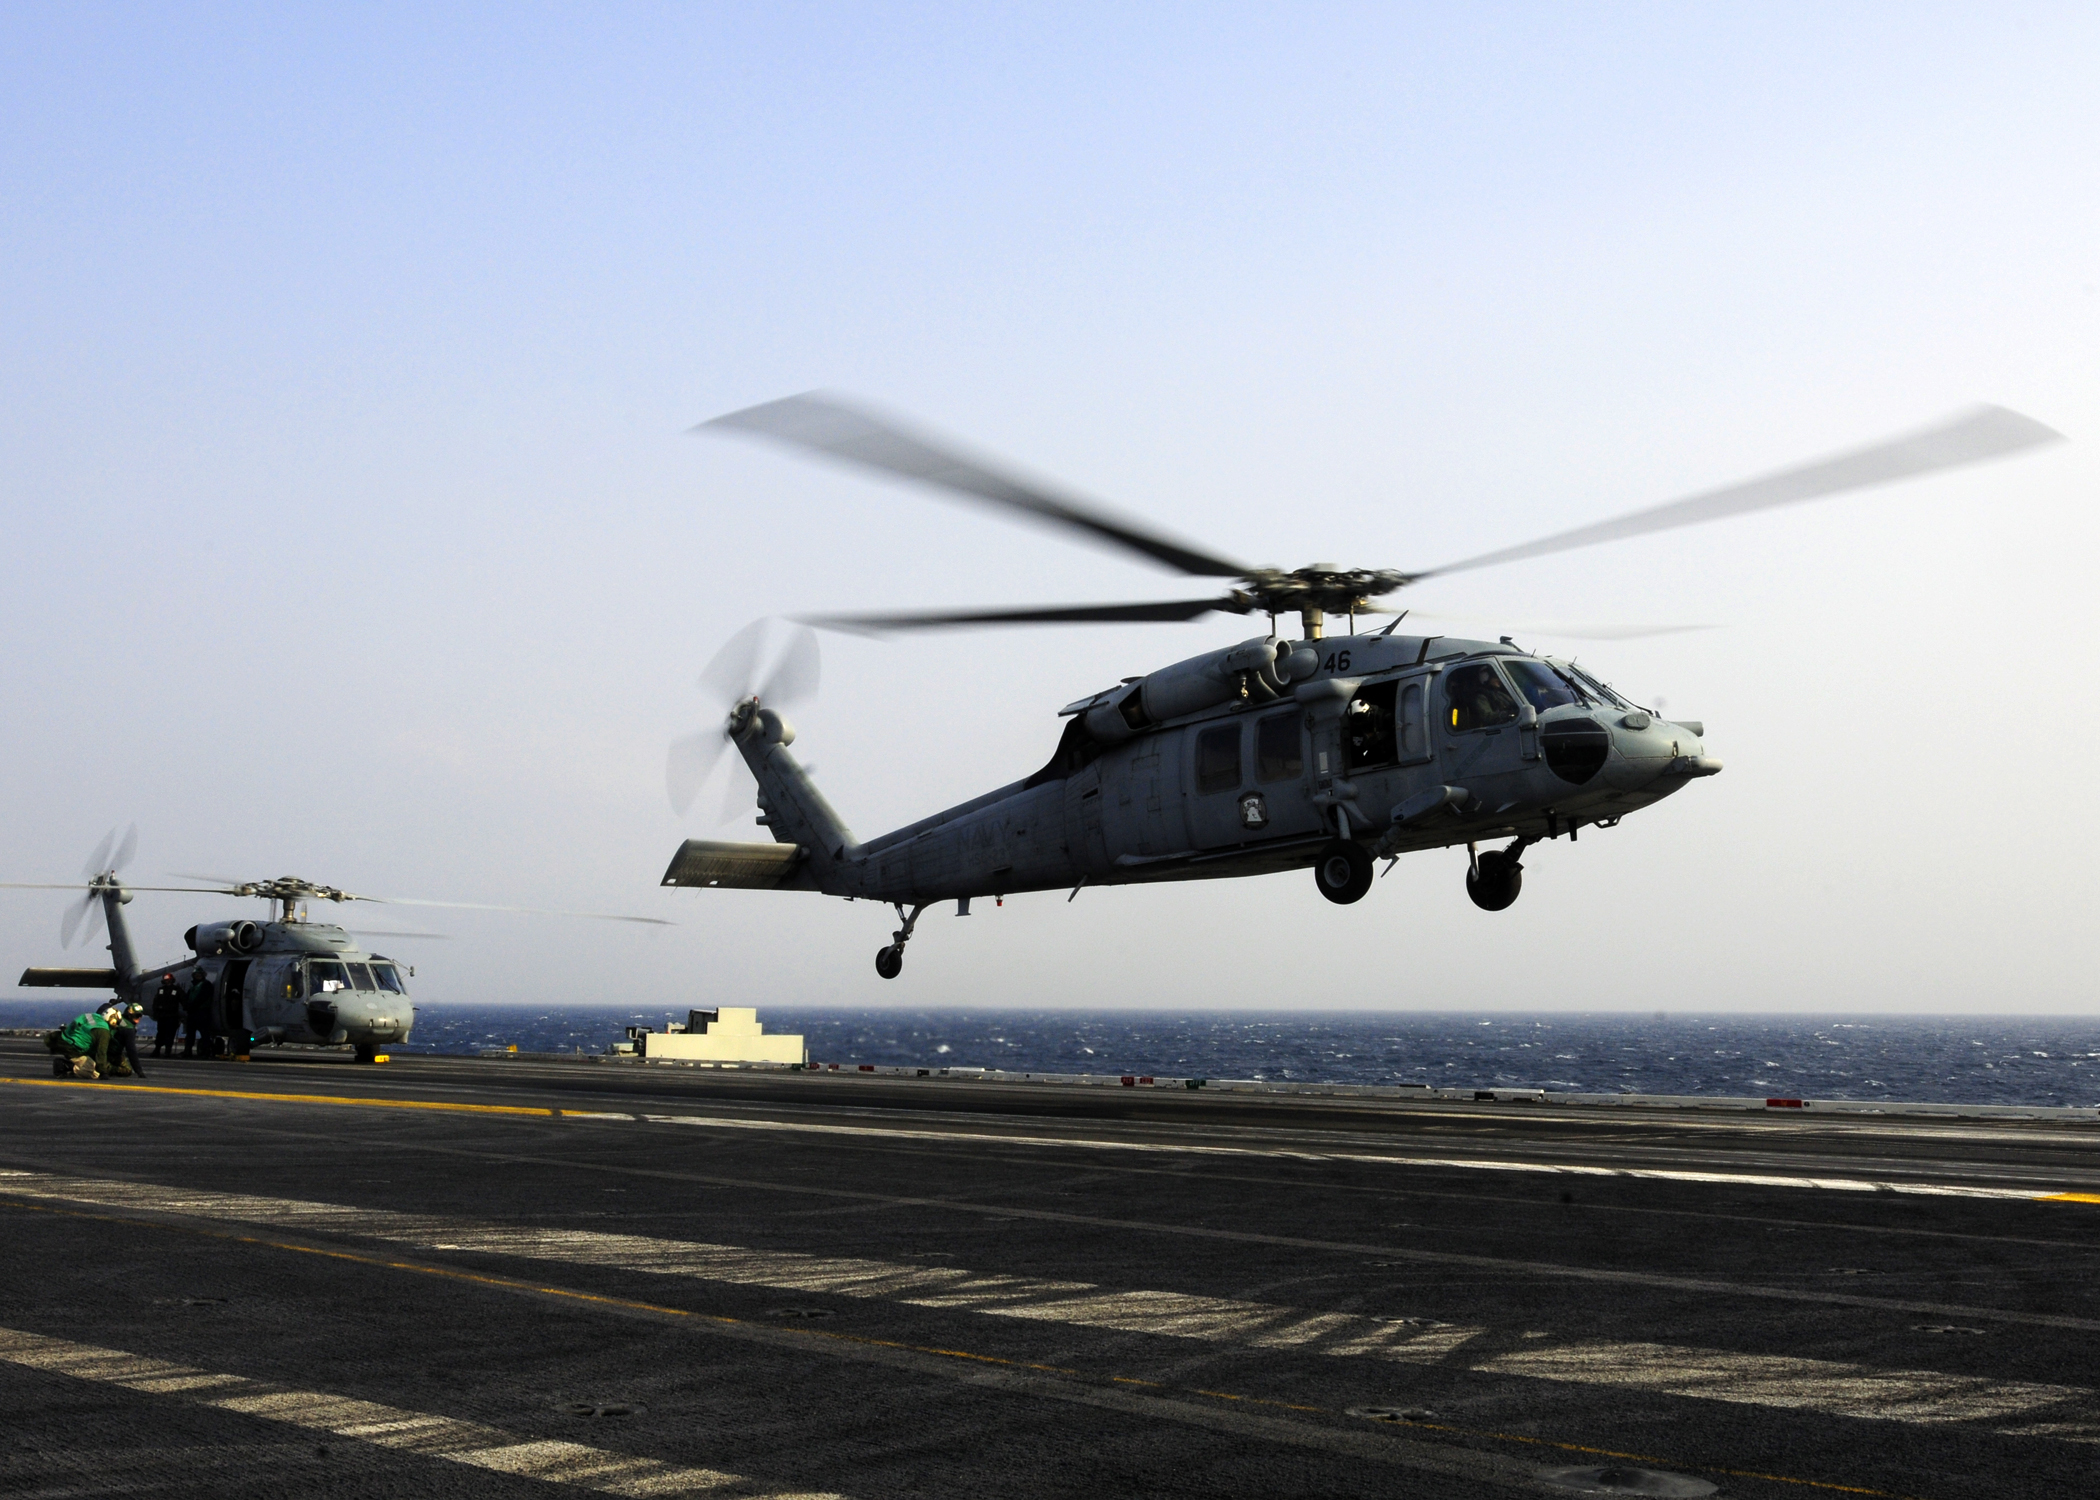 Military Sikorsky SH-60 Seahawk Sikorsky Mh-60s Seahawk Helicopter Navy Air Force ...2100 x 1500